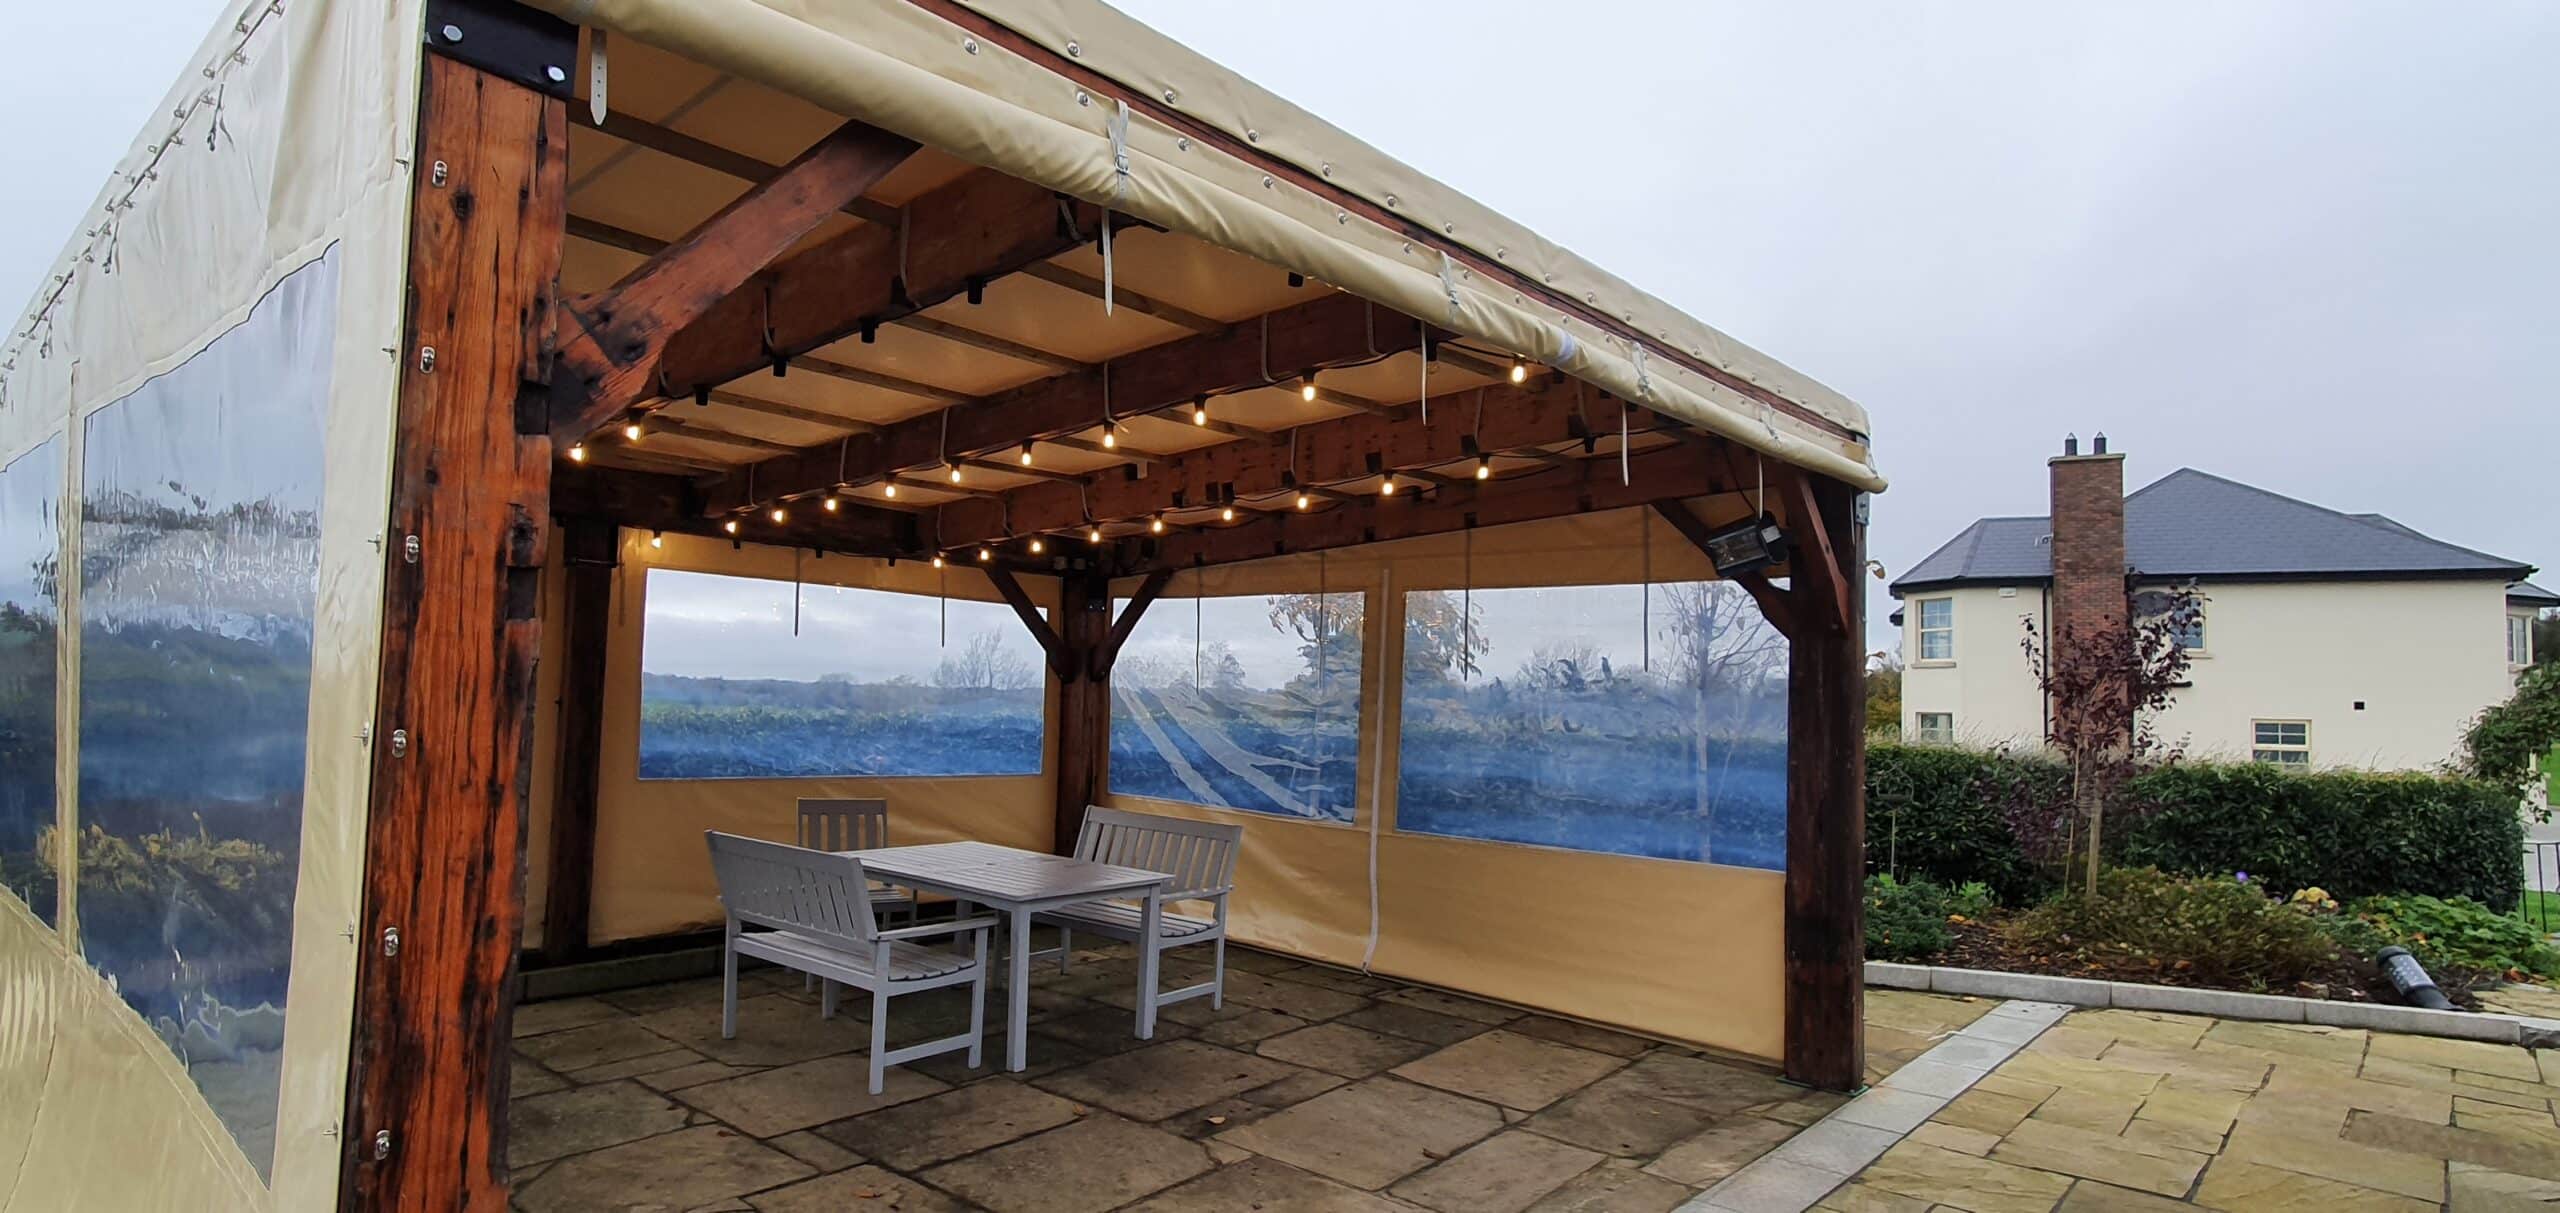 Cream Waterproof PVC Pergola Cover with Roll Up Sides